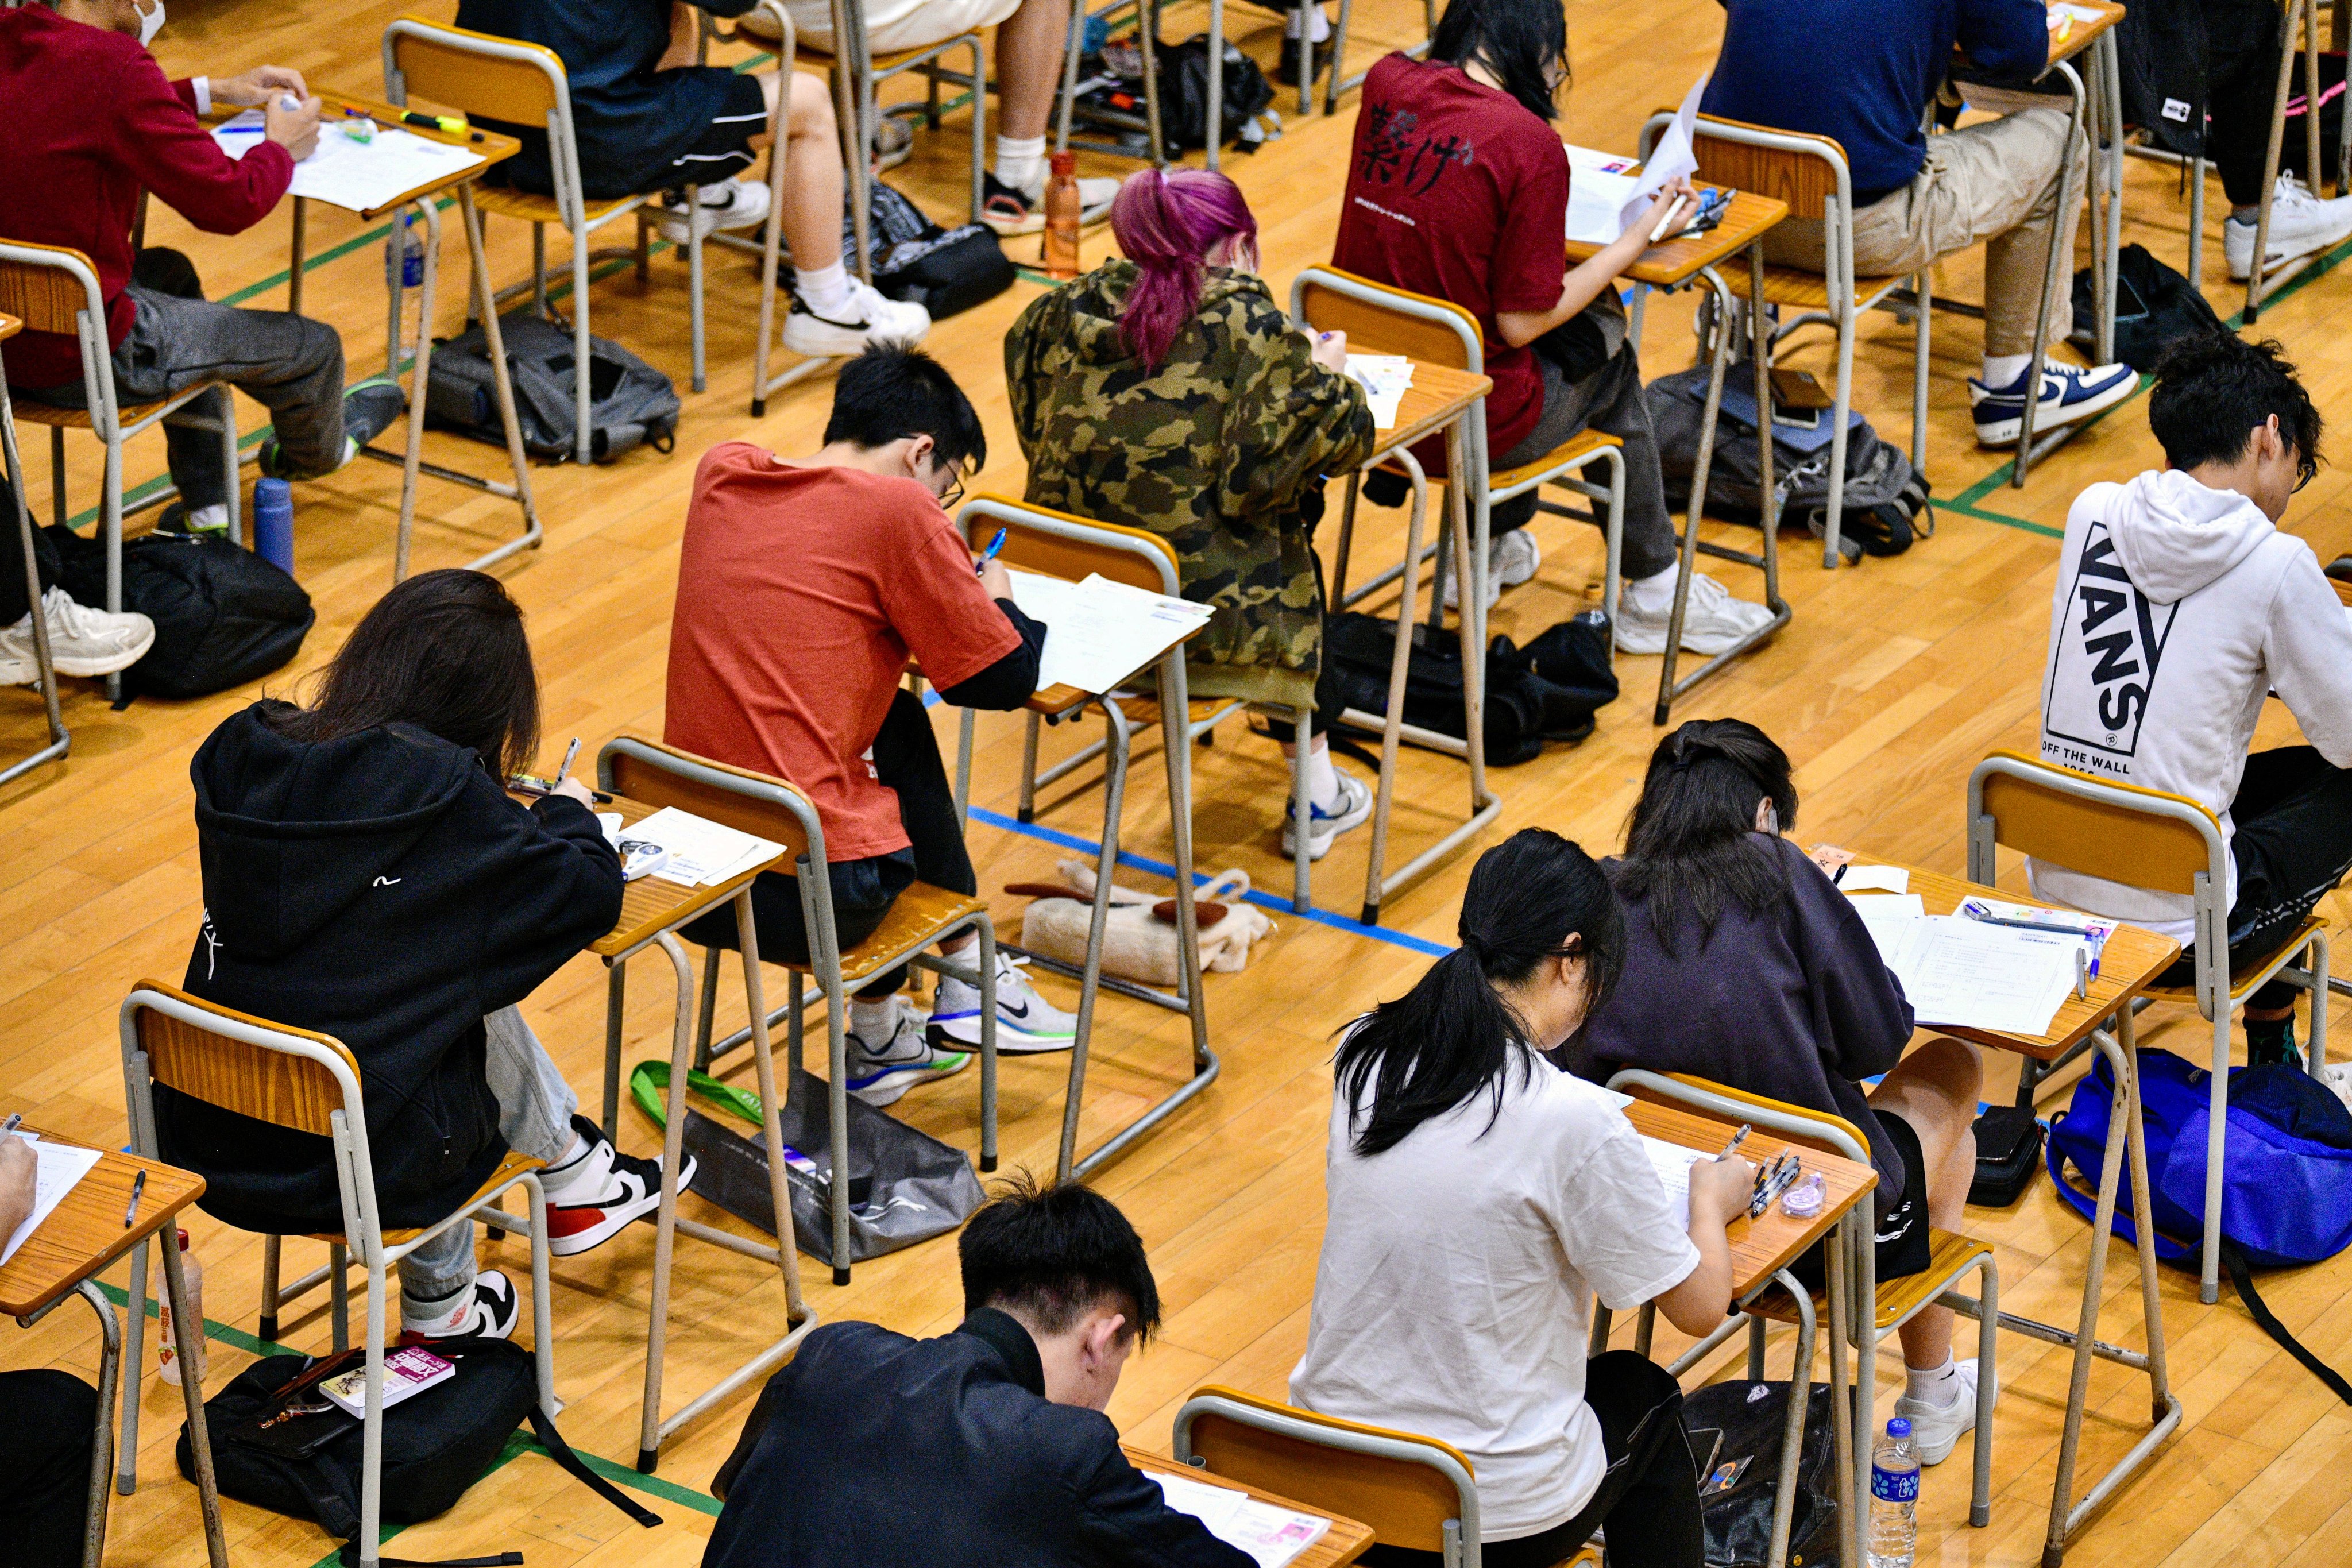 A test under way at a school in Tai Po. Examination personnel are prohibited from reproducing or publishing related content without approval. Photo: Handout